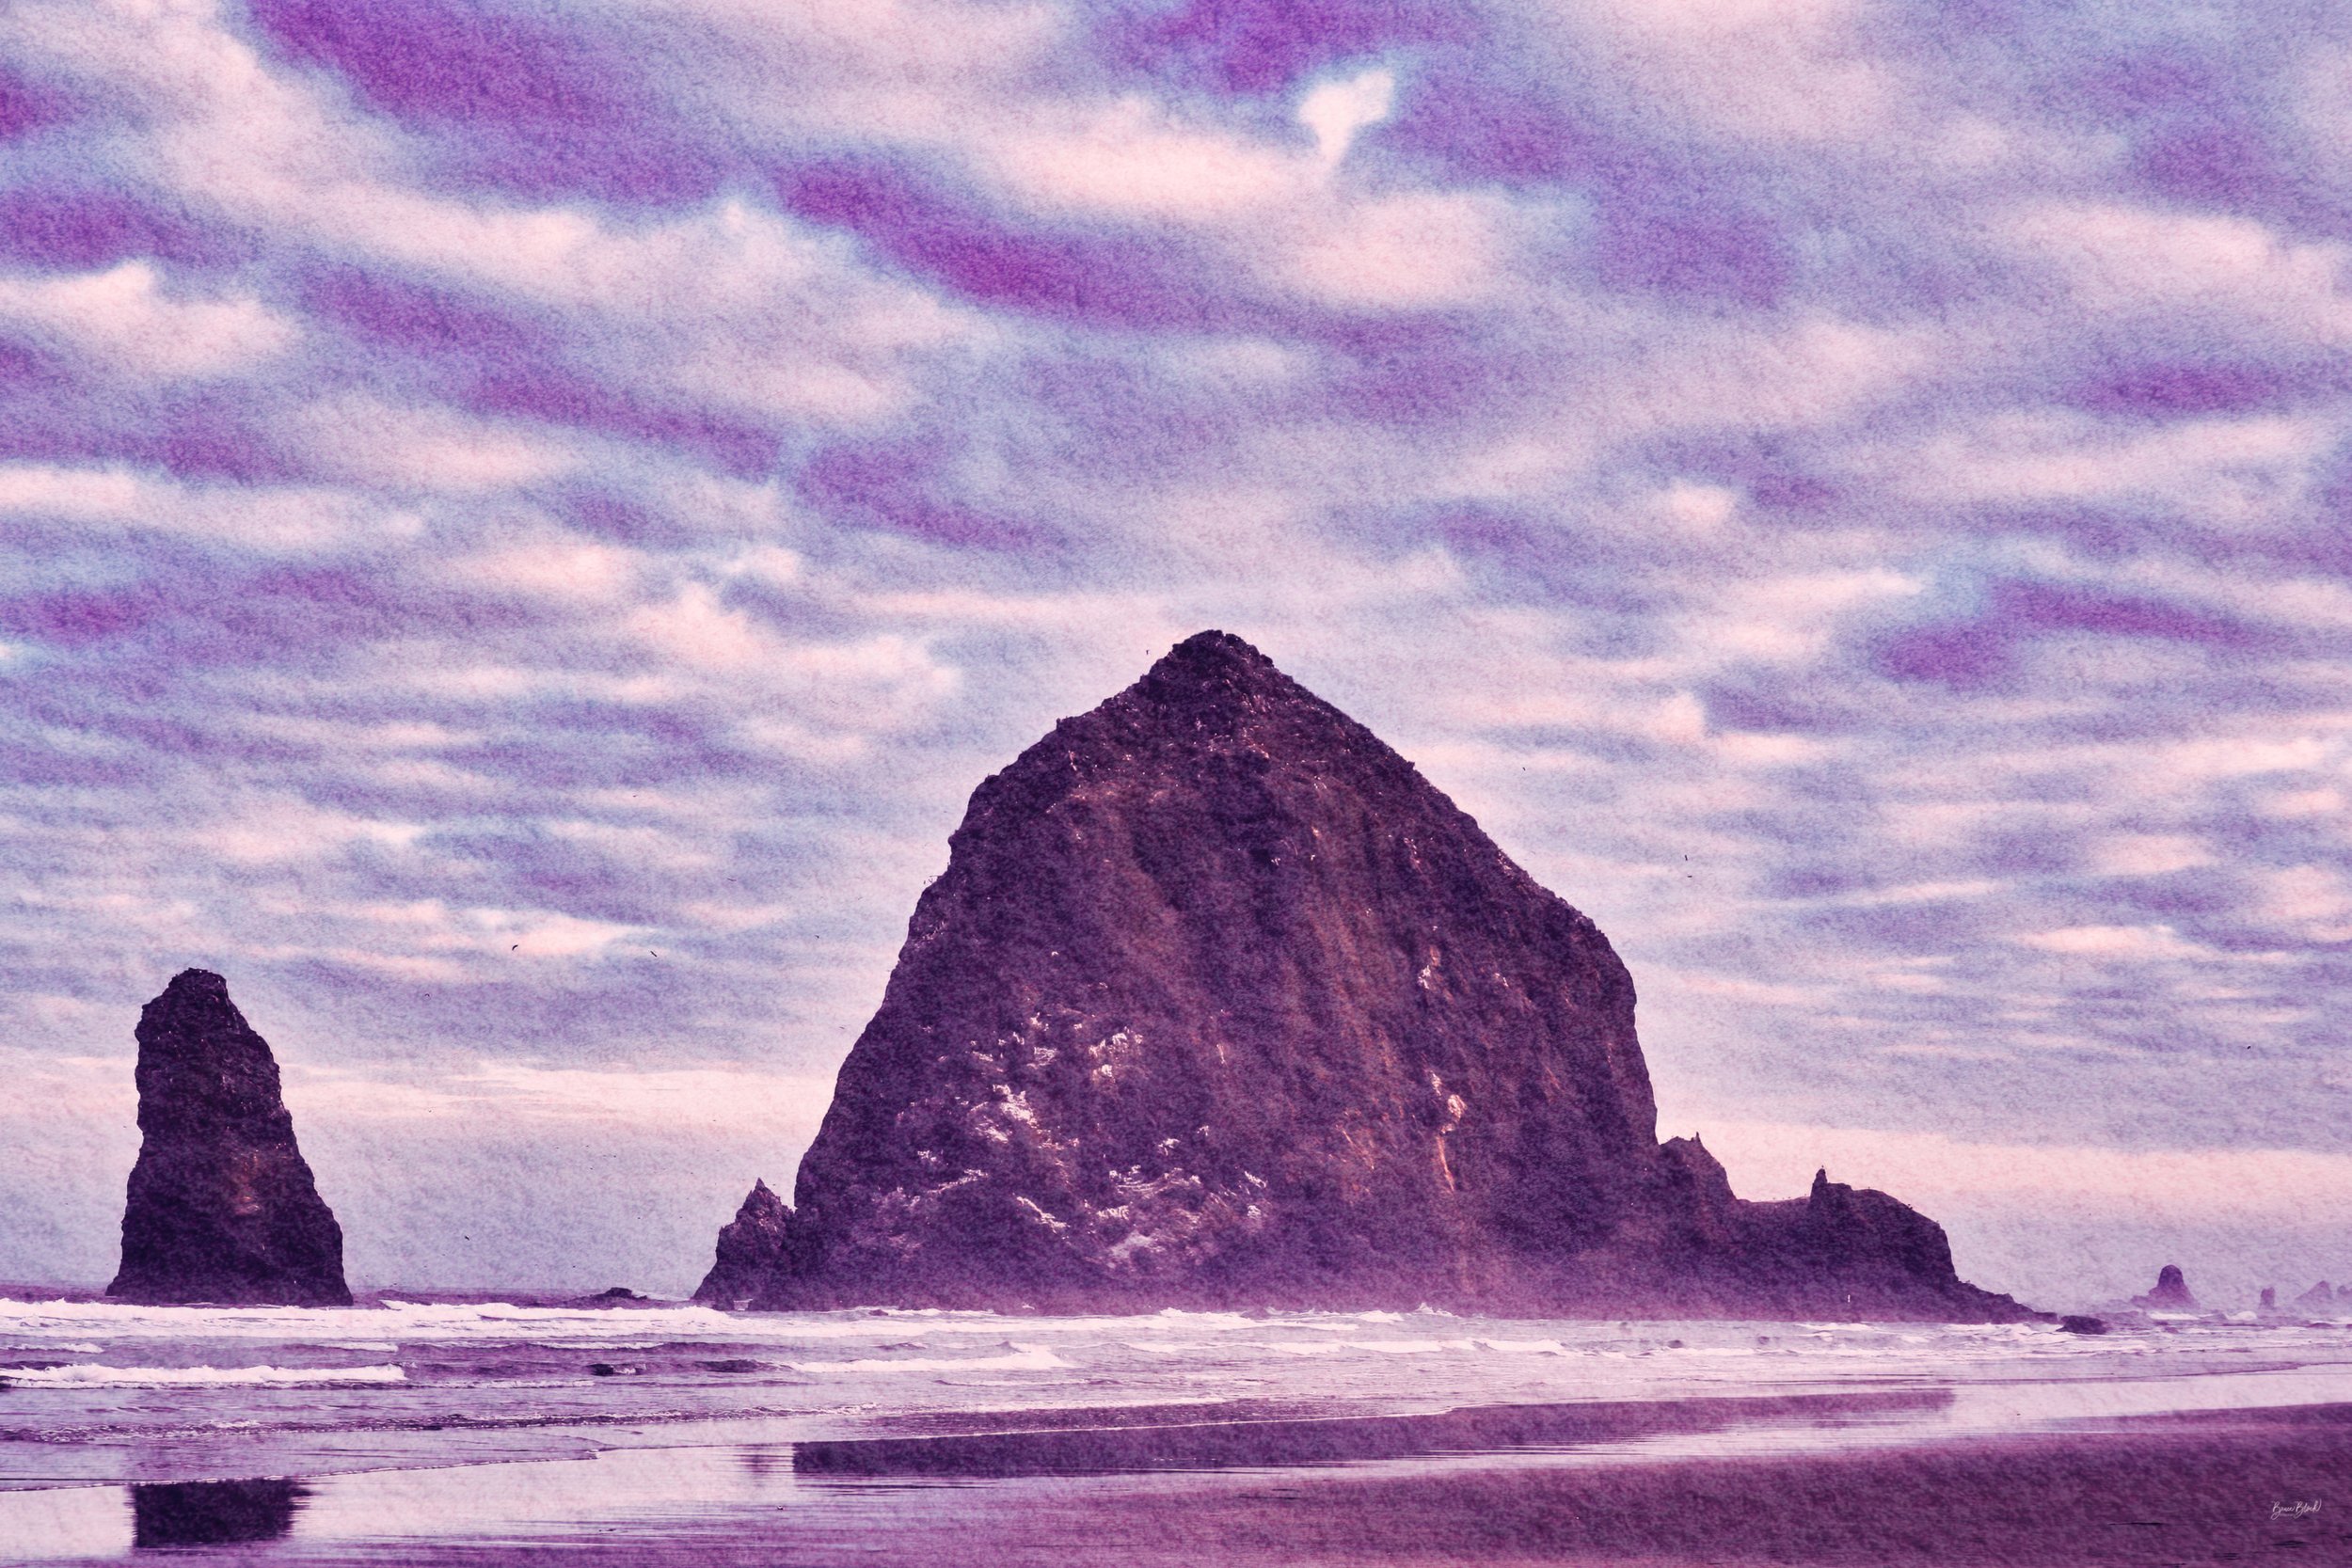 Block_Bruce_Haystack_Rock_and_Cannon_Beach_with_Sand_Texture_Digital_art_print_30x20.jpeg